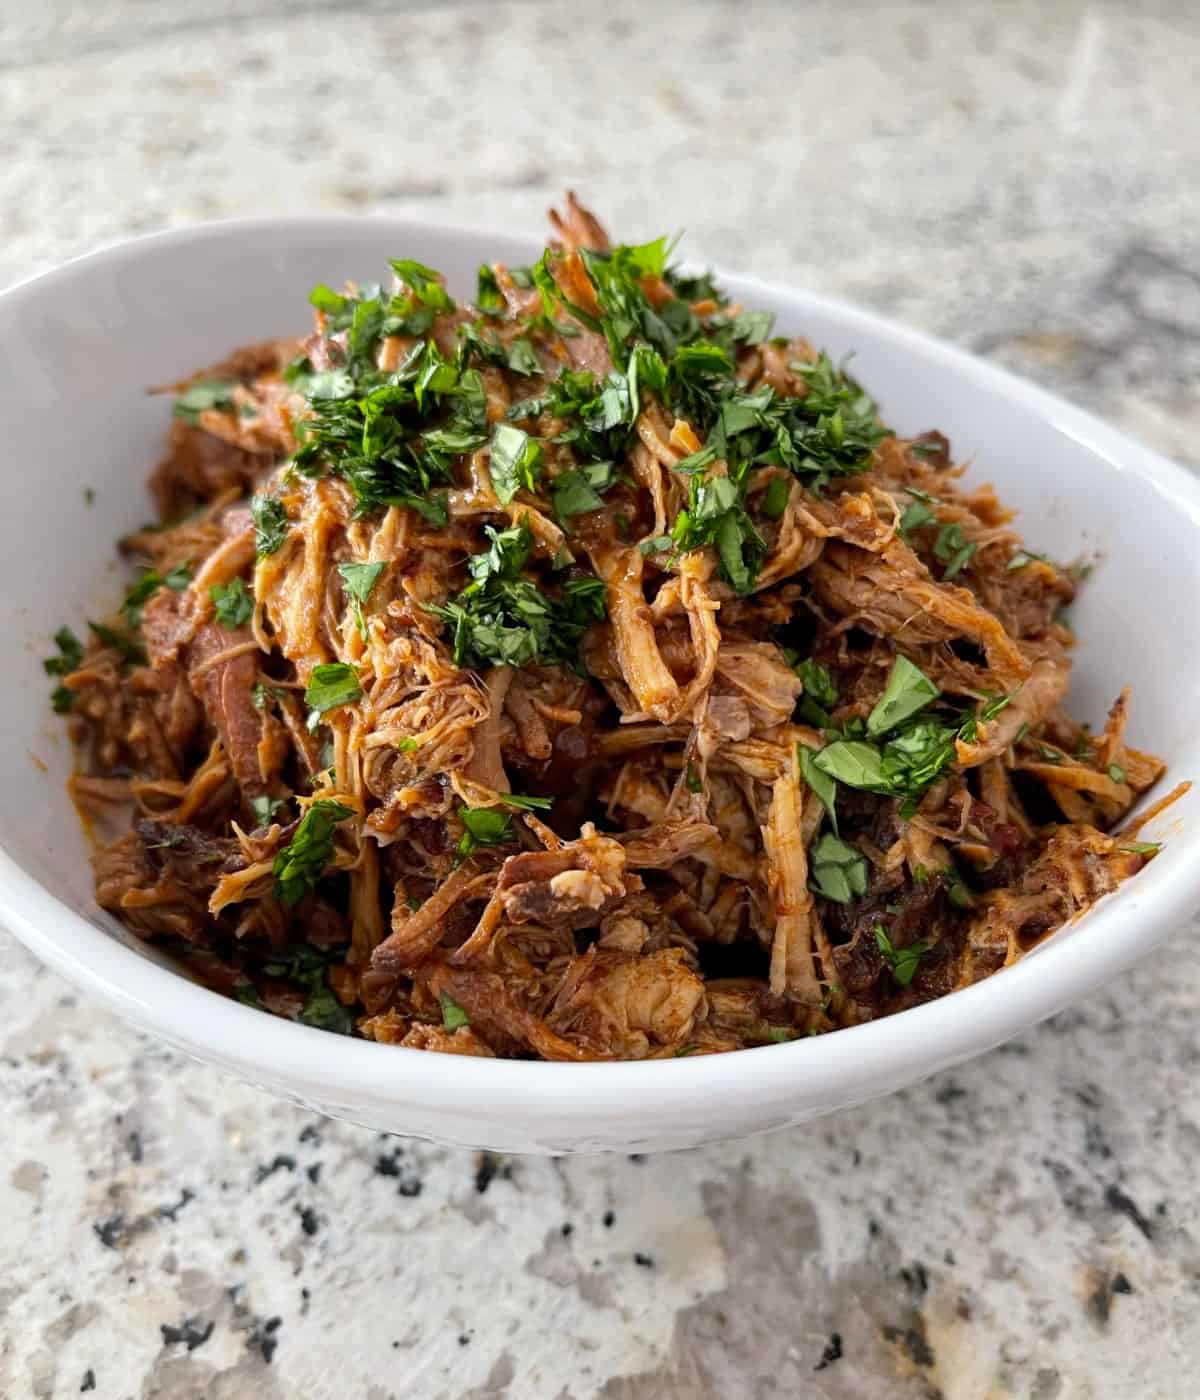 InstantPot Cherry Chipotle Shredded Pork topped with chopped cilantro in white serving dish.